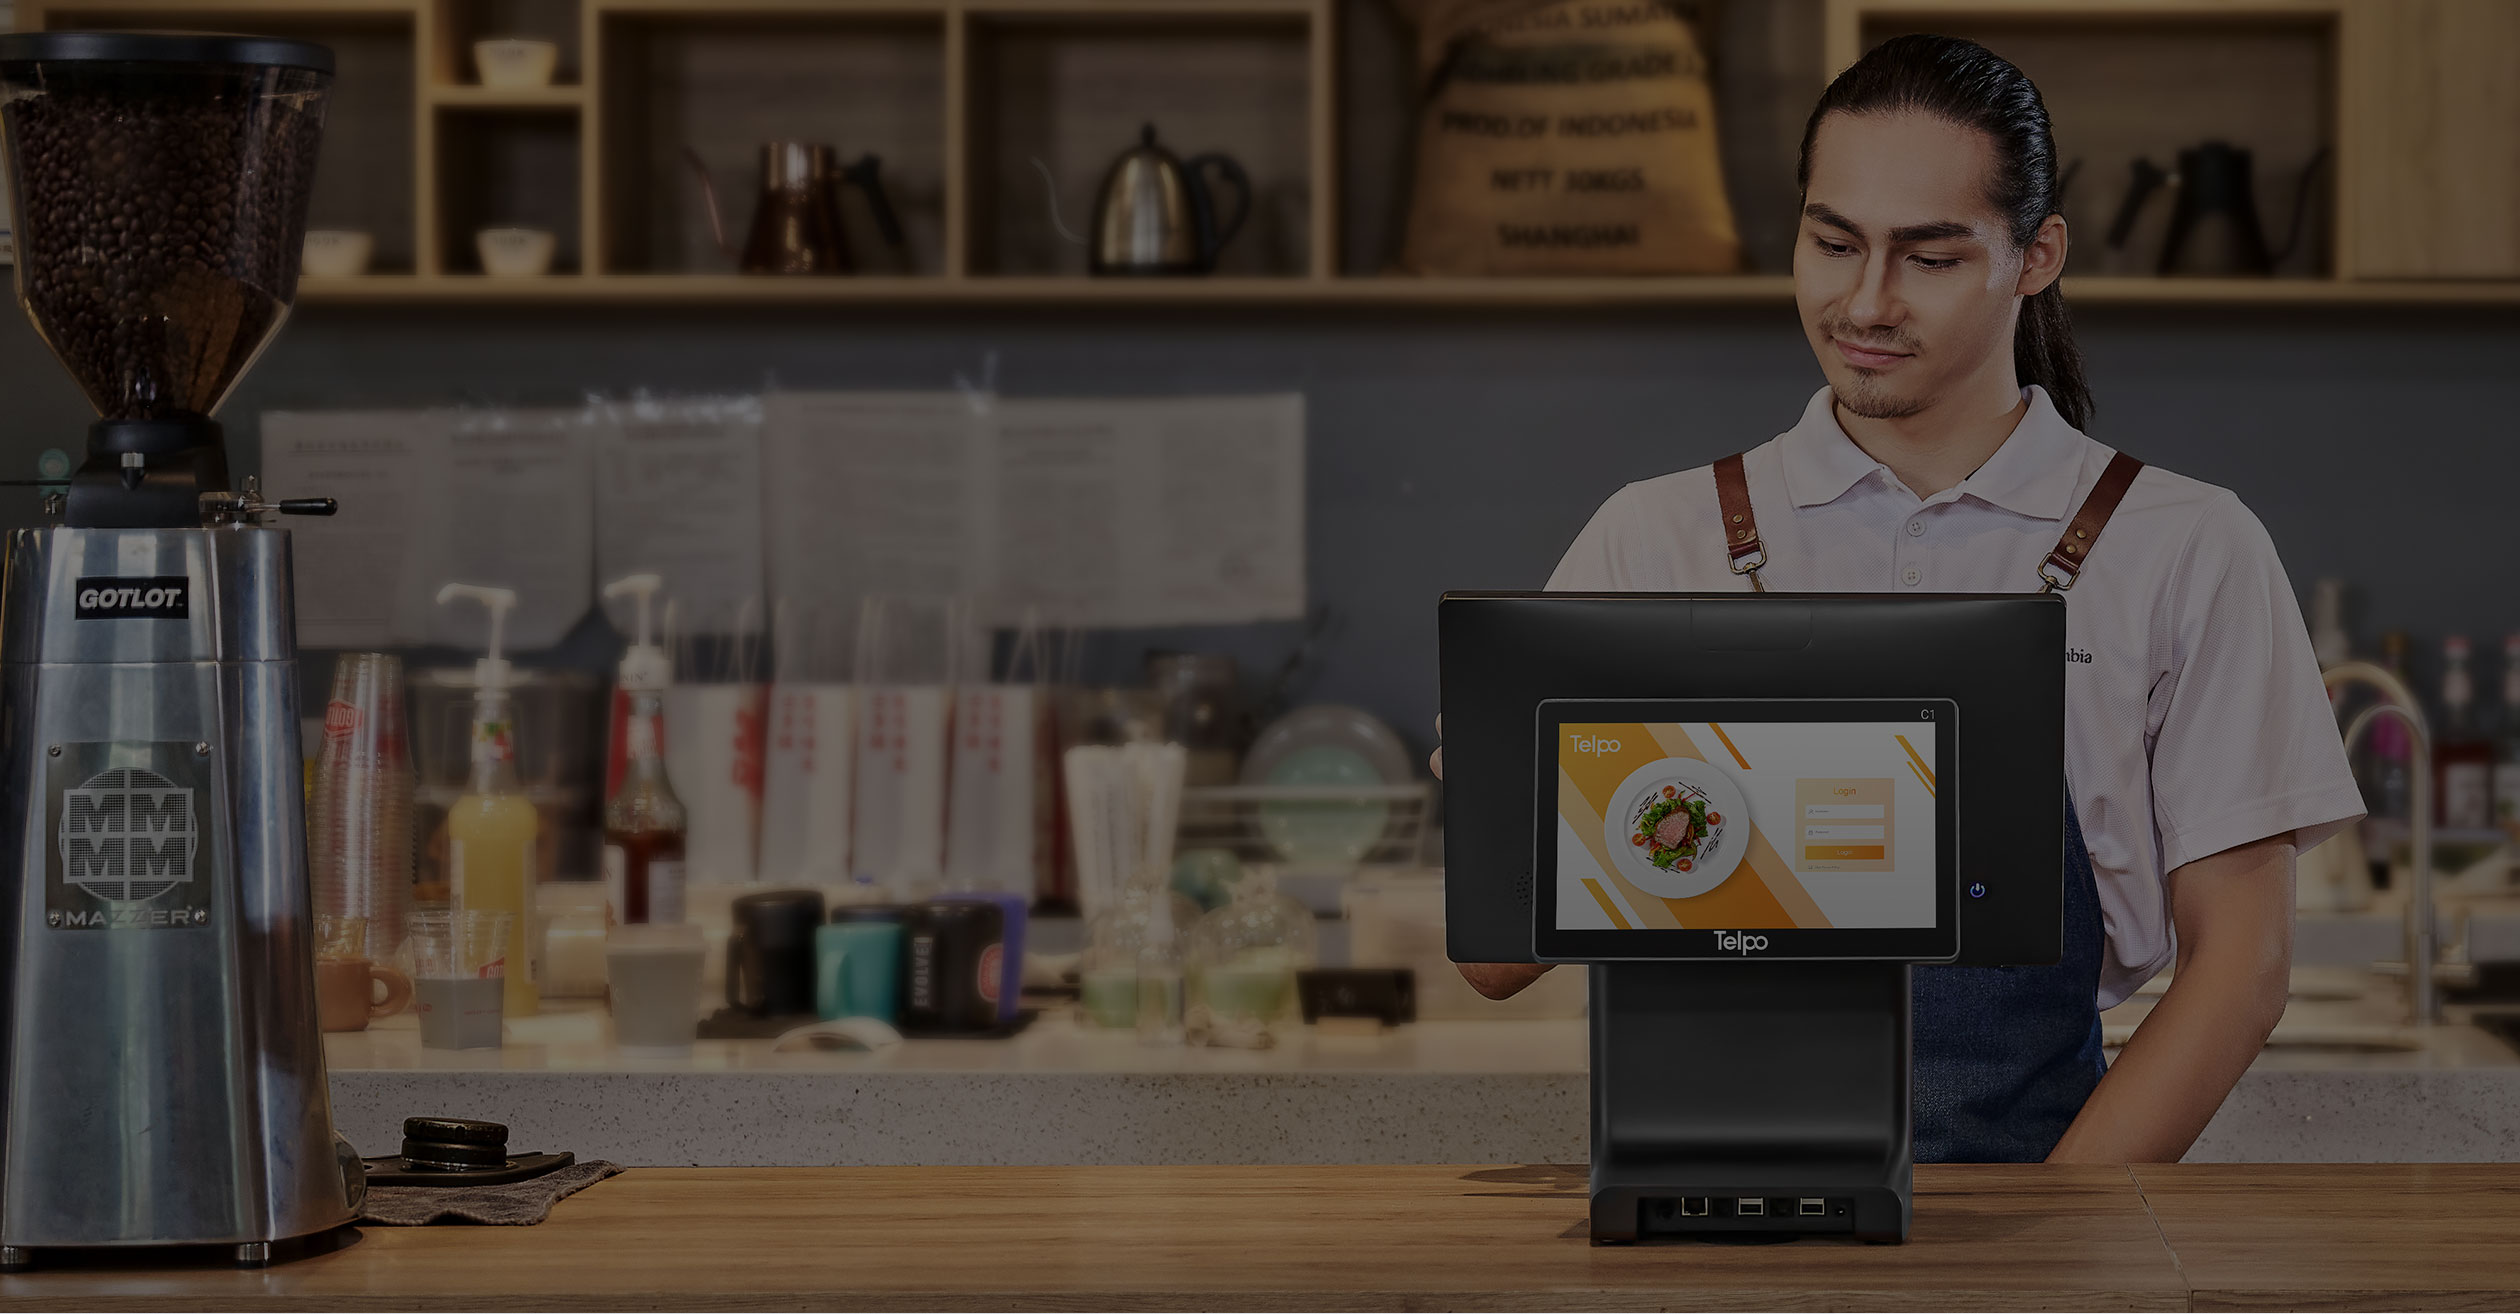 point-of-sale-landing-page_01.jpg